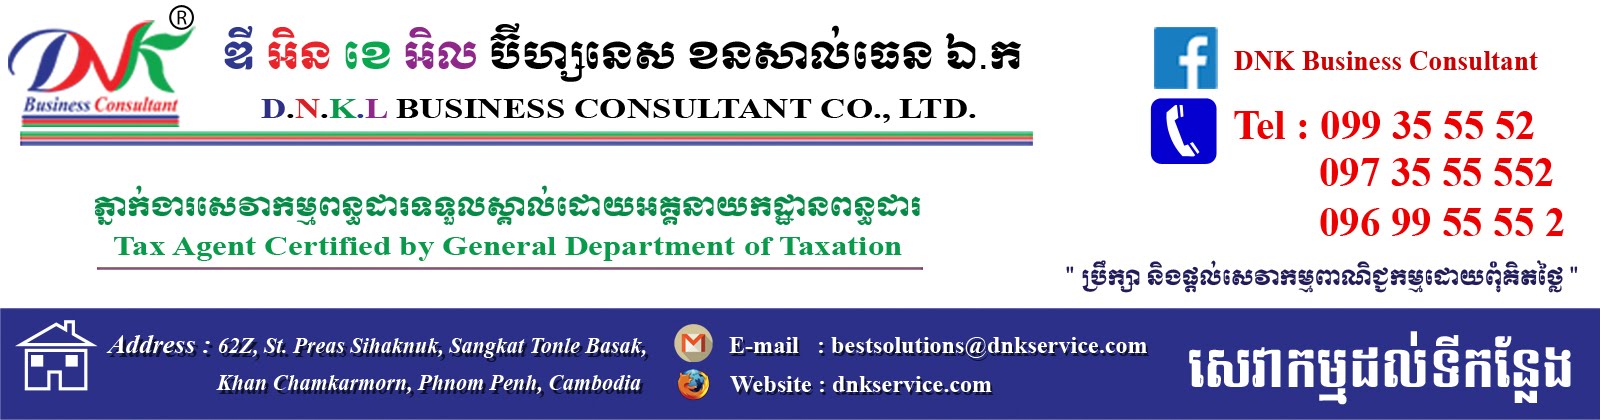 DNK Business Consultant 